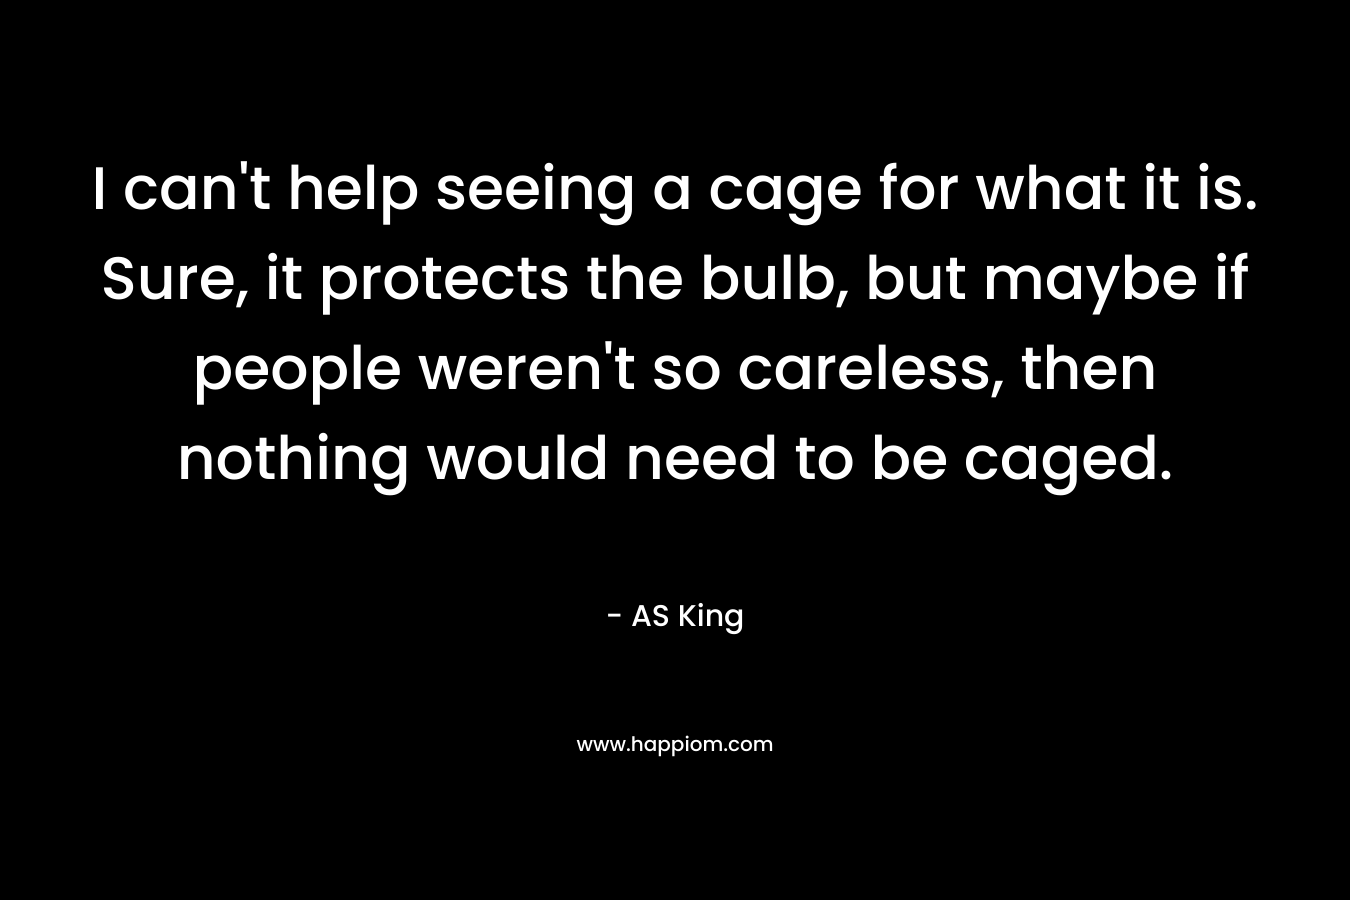 I can’t help seeing a cage for what it is. Sure, it protects the bulb, but maybe if people weren’t so careless, then nothing would need to be caged. – AS King